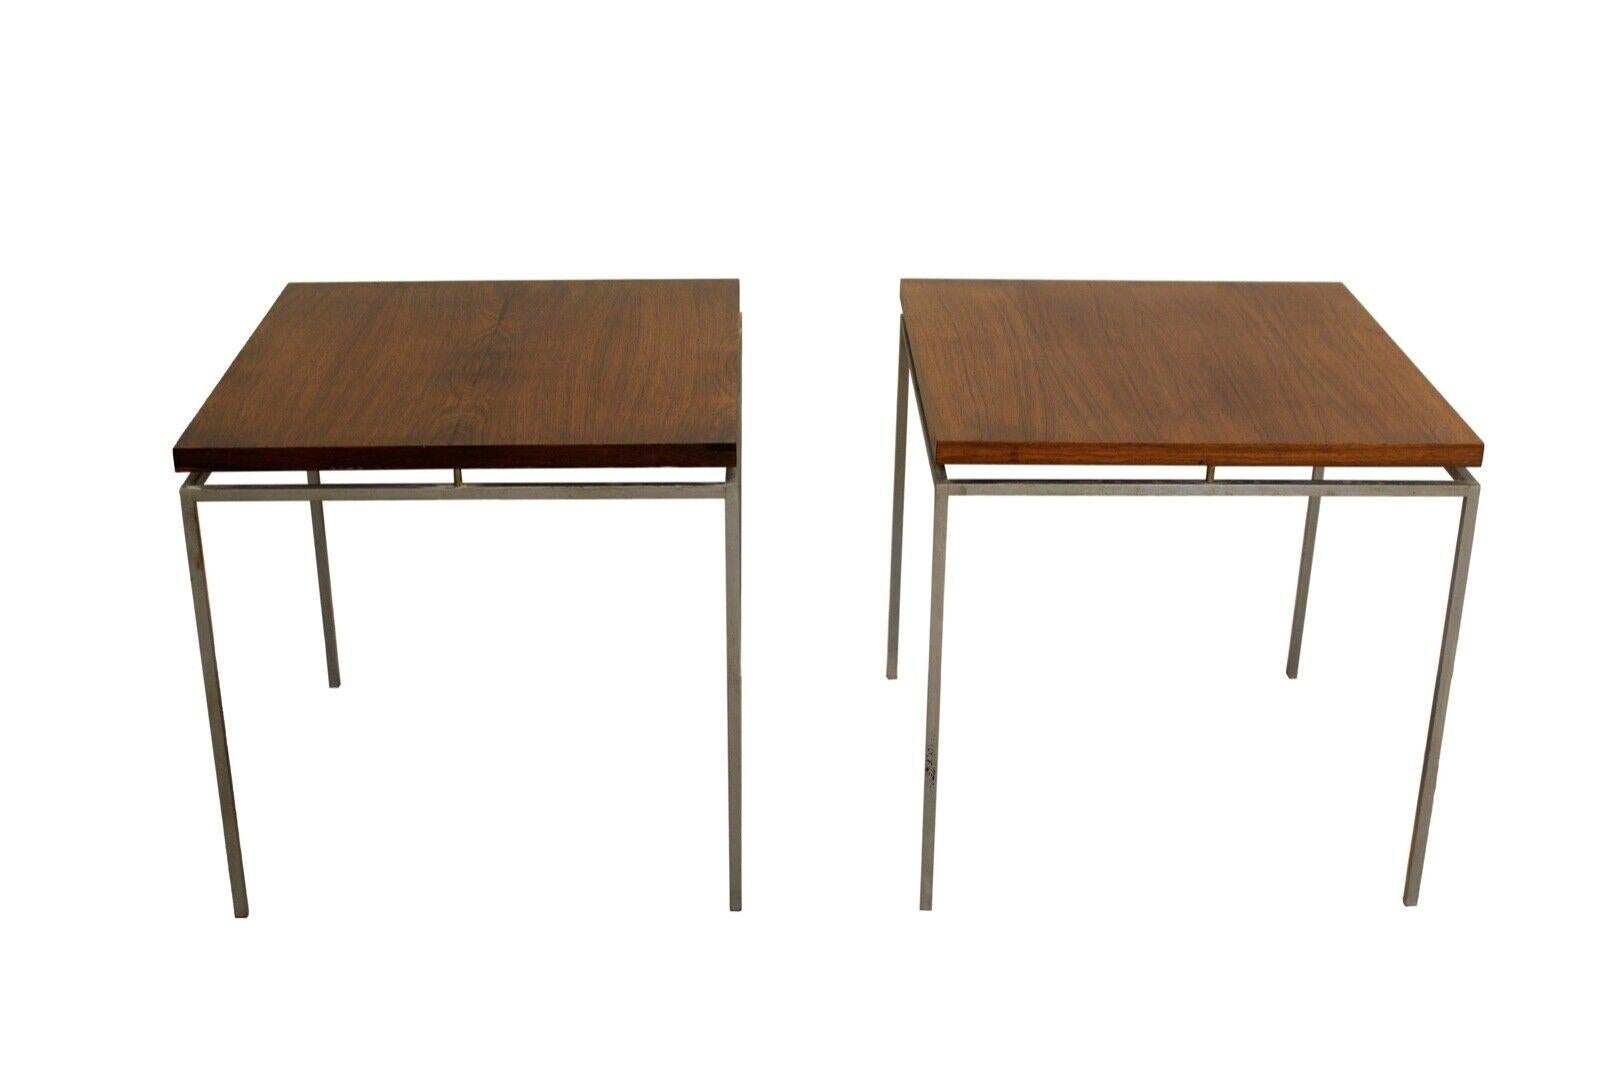 Le Shoppe Too presents this Pair of side tables in rosewood designed by Knud Joos and made by Jason Furniture Denmark, professionally refinished, in great condition. Dimensions: 16